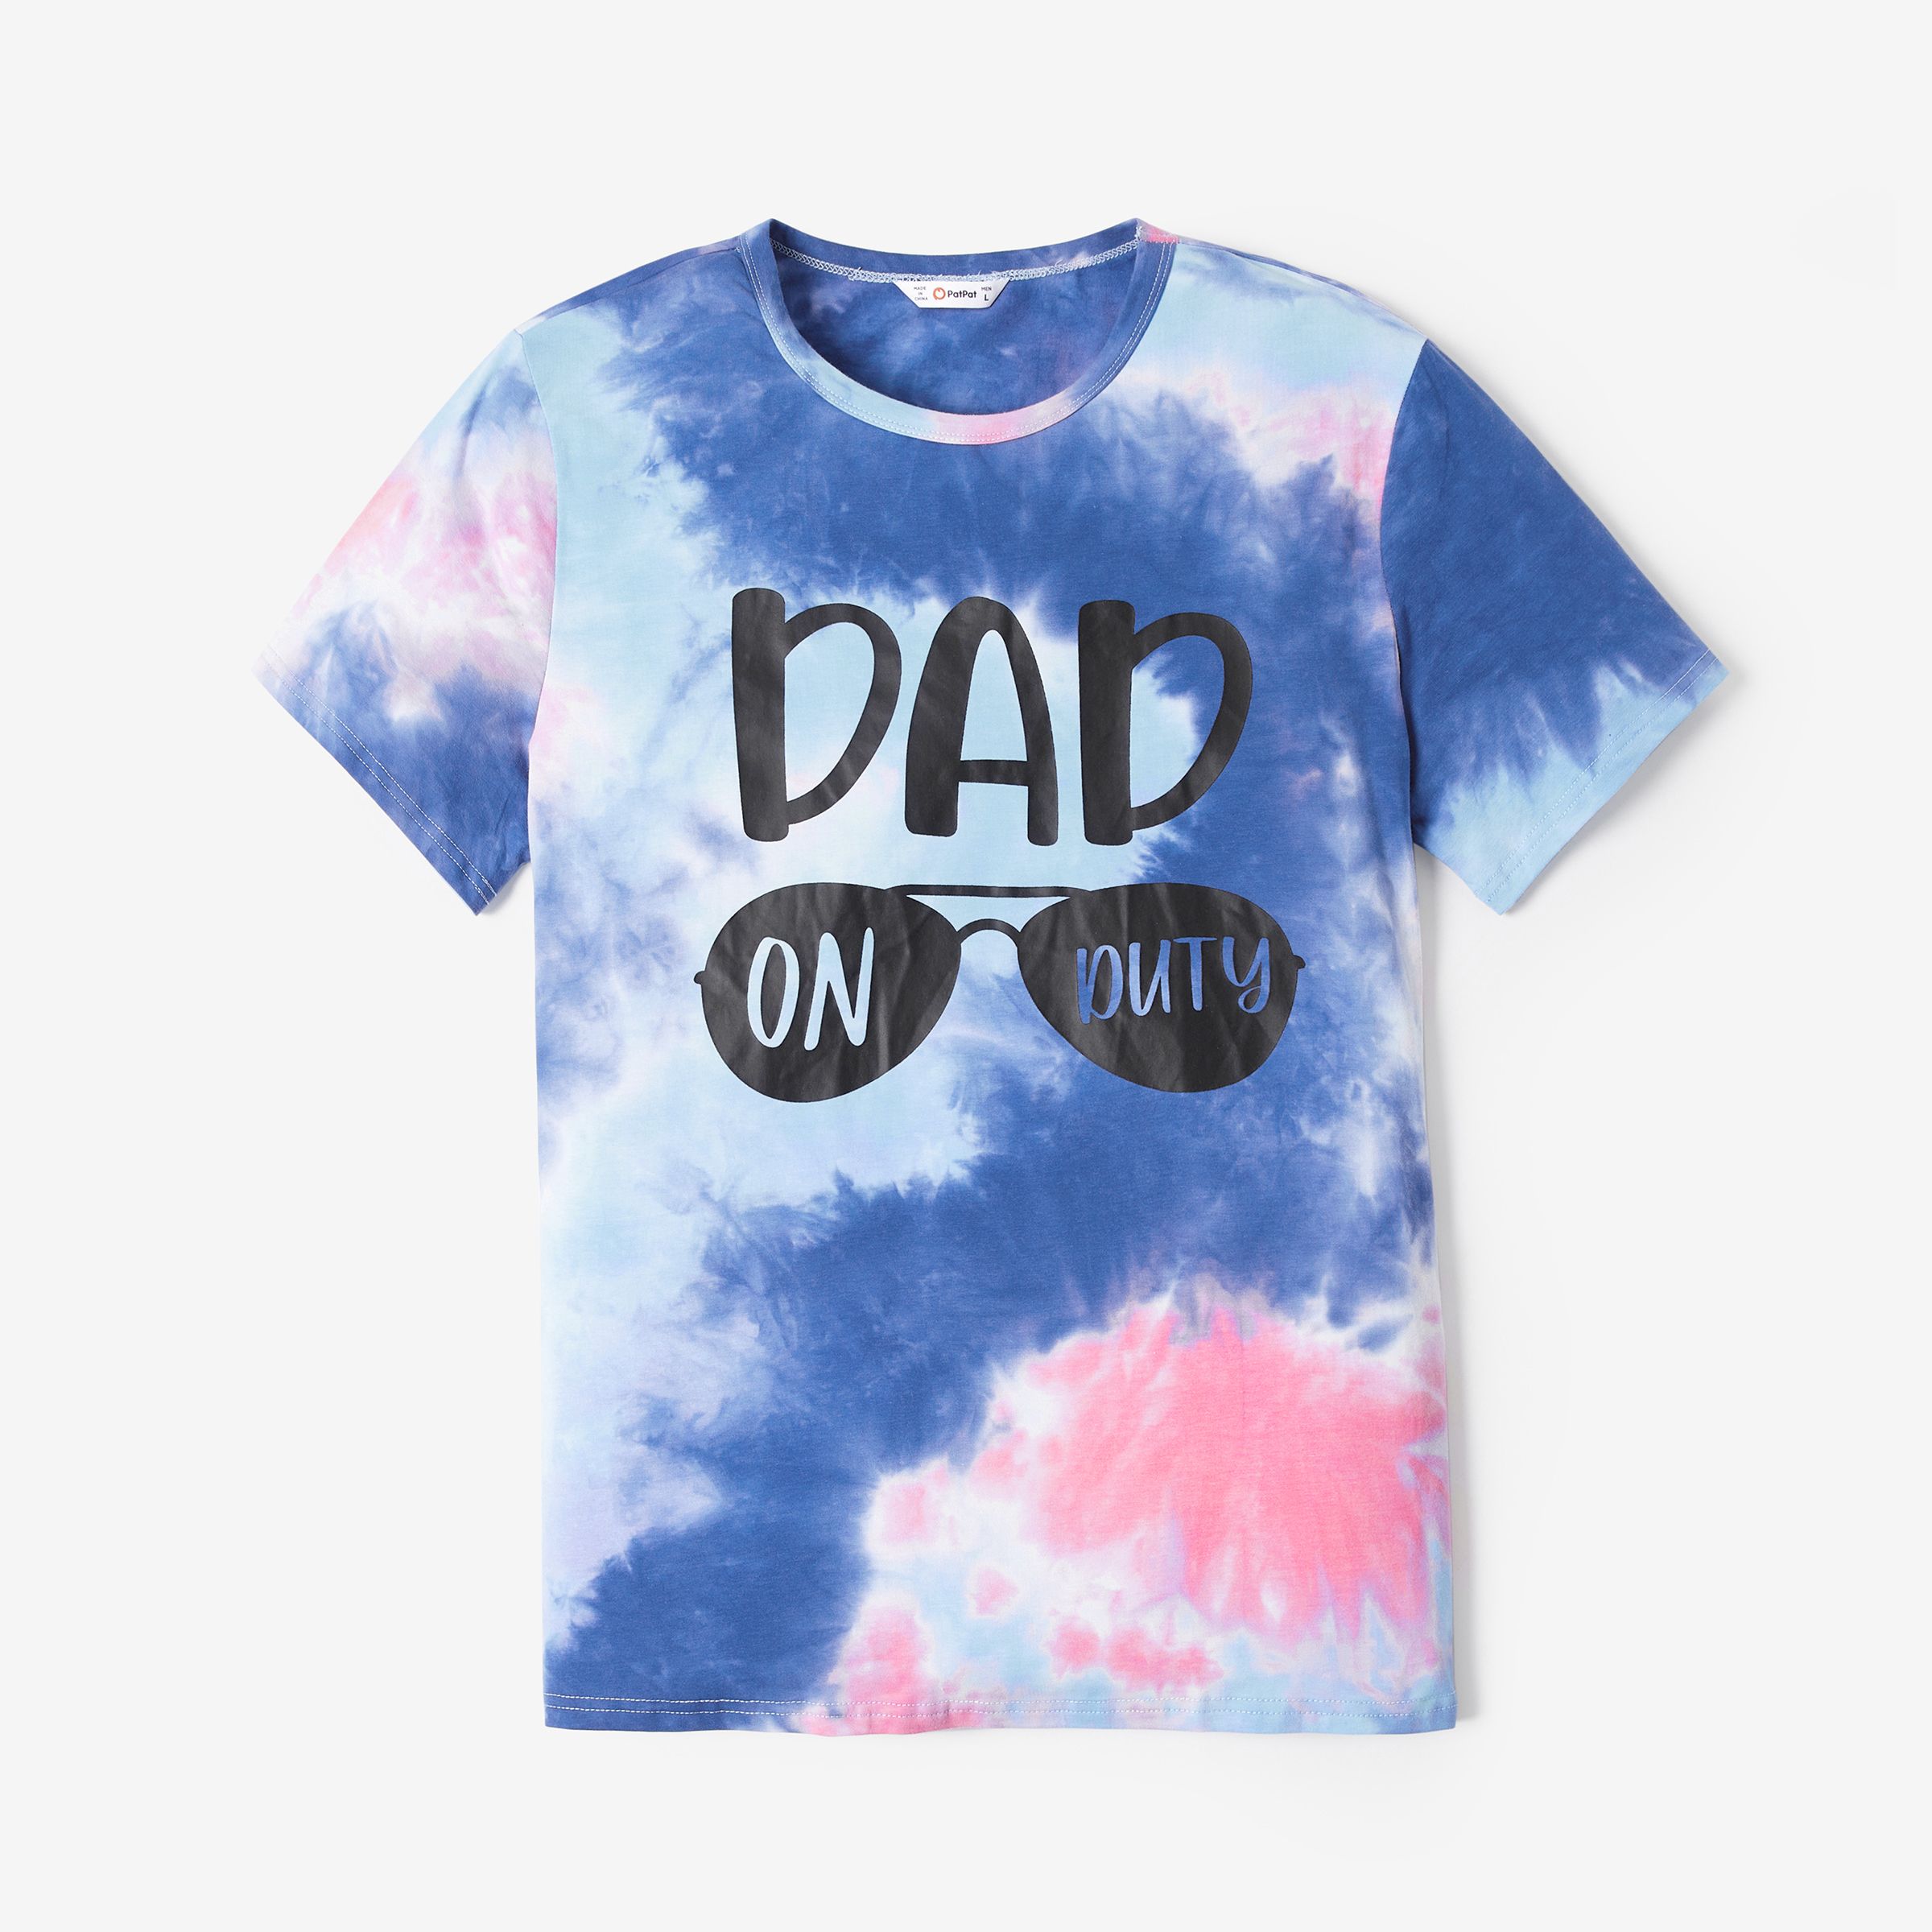 Family Matching Dye-Tie Sunglasses Pattern Short Sleeves Tops